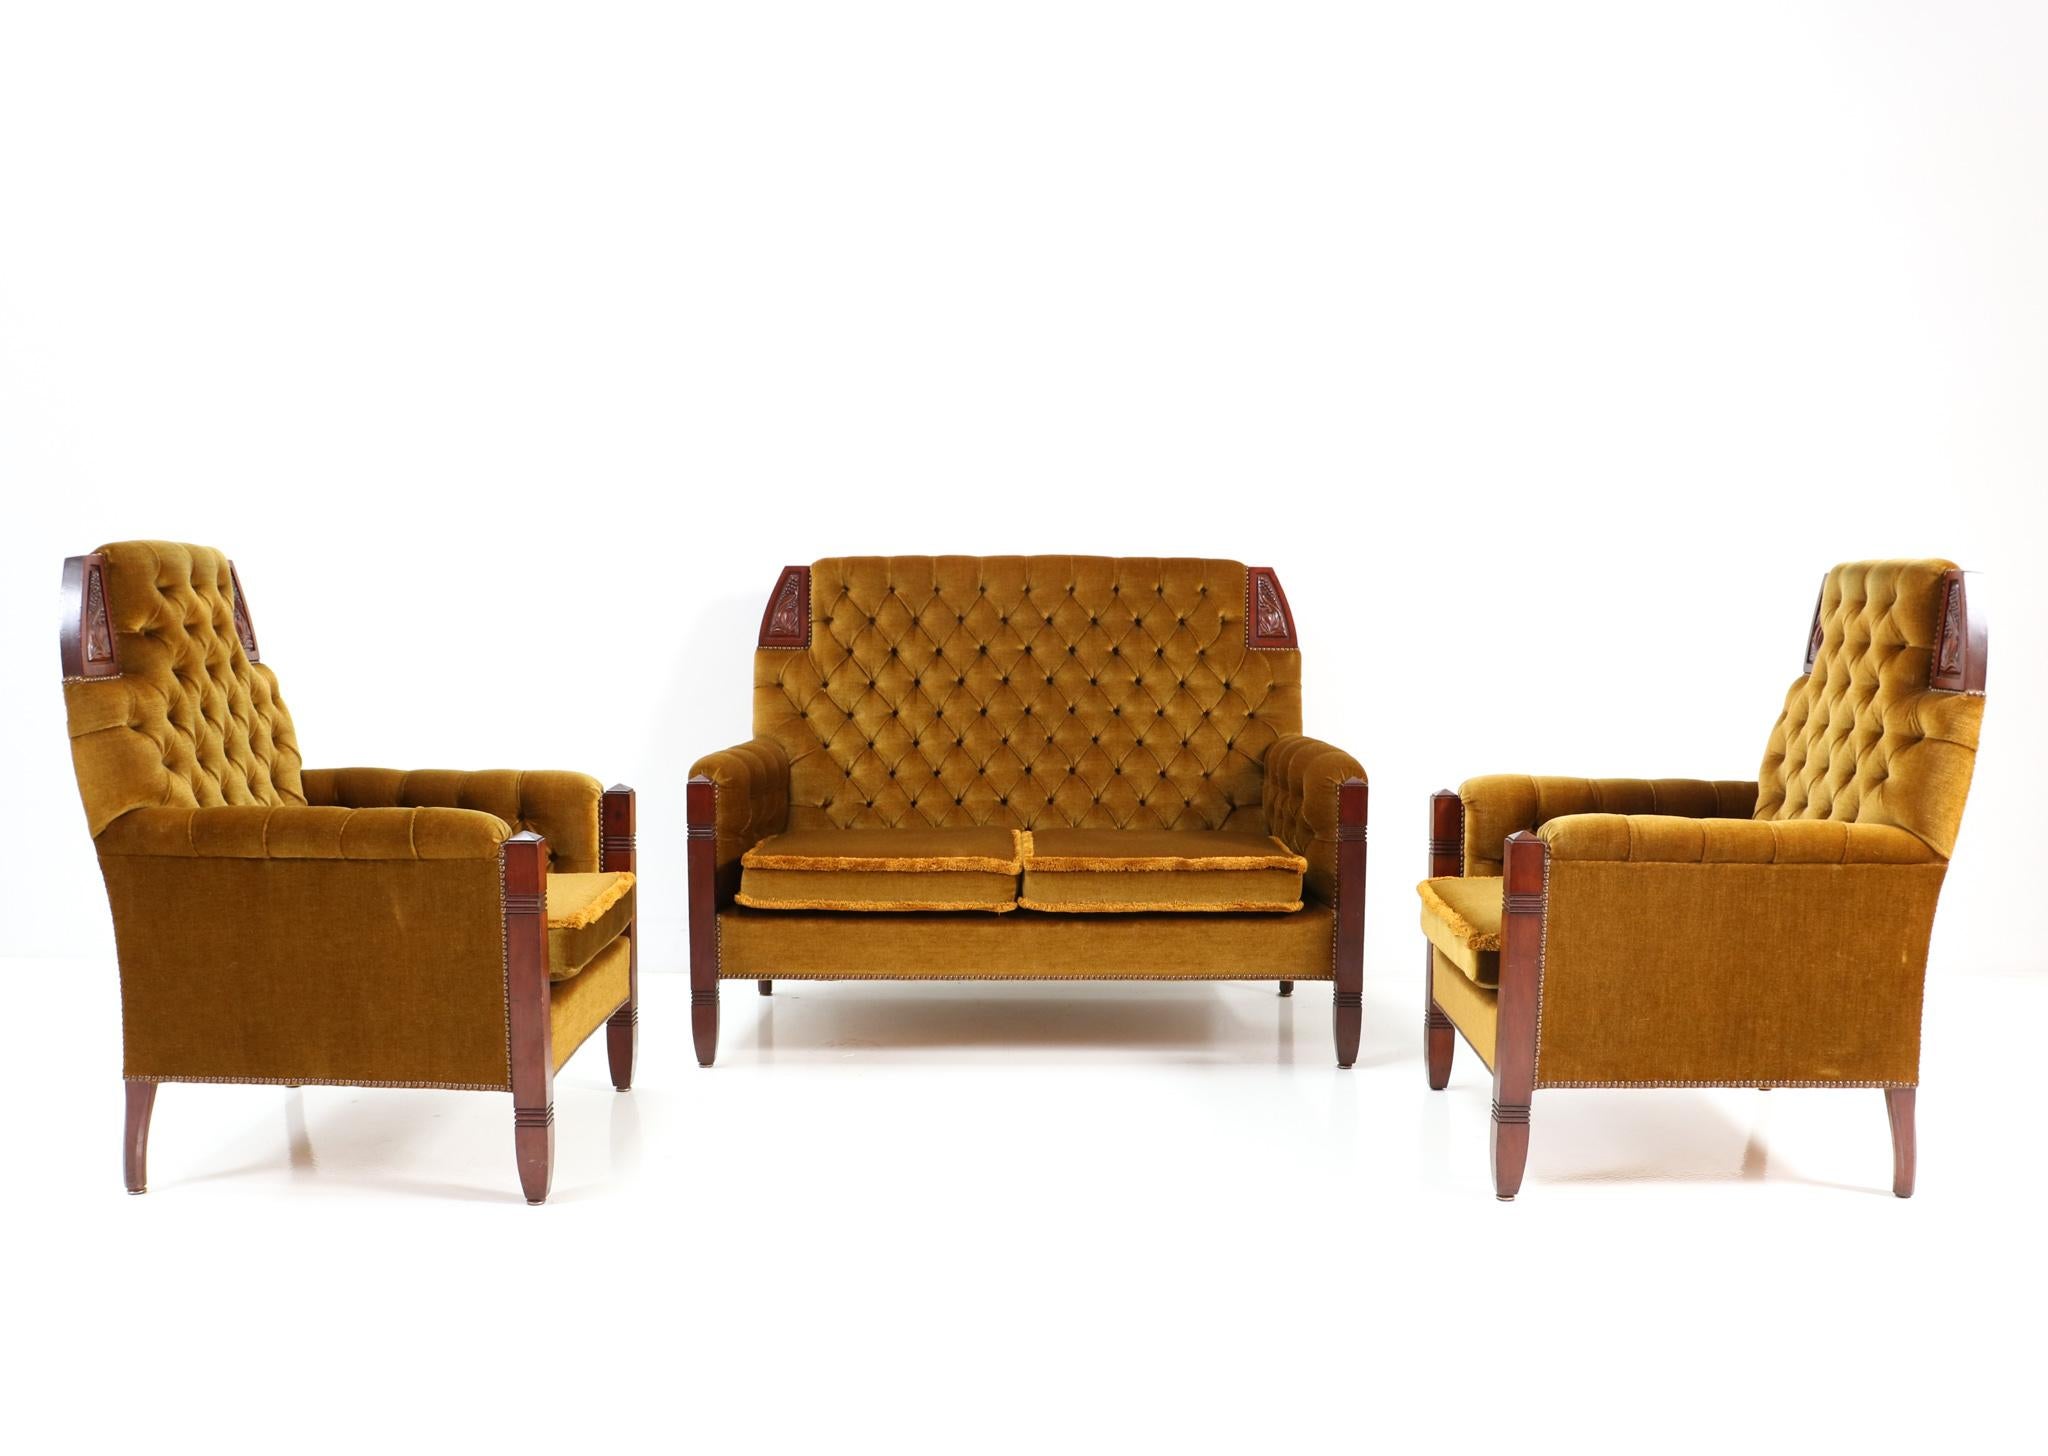 Magnificent and rare Art Deco living room set.
Striking French design from the 1930s.
Solid walnut frames and re-upholstered with velvet by the previous owner.
The set consists of a bench or sofa and two matching armchairs.
Dimensions of the